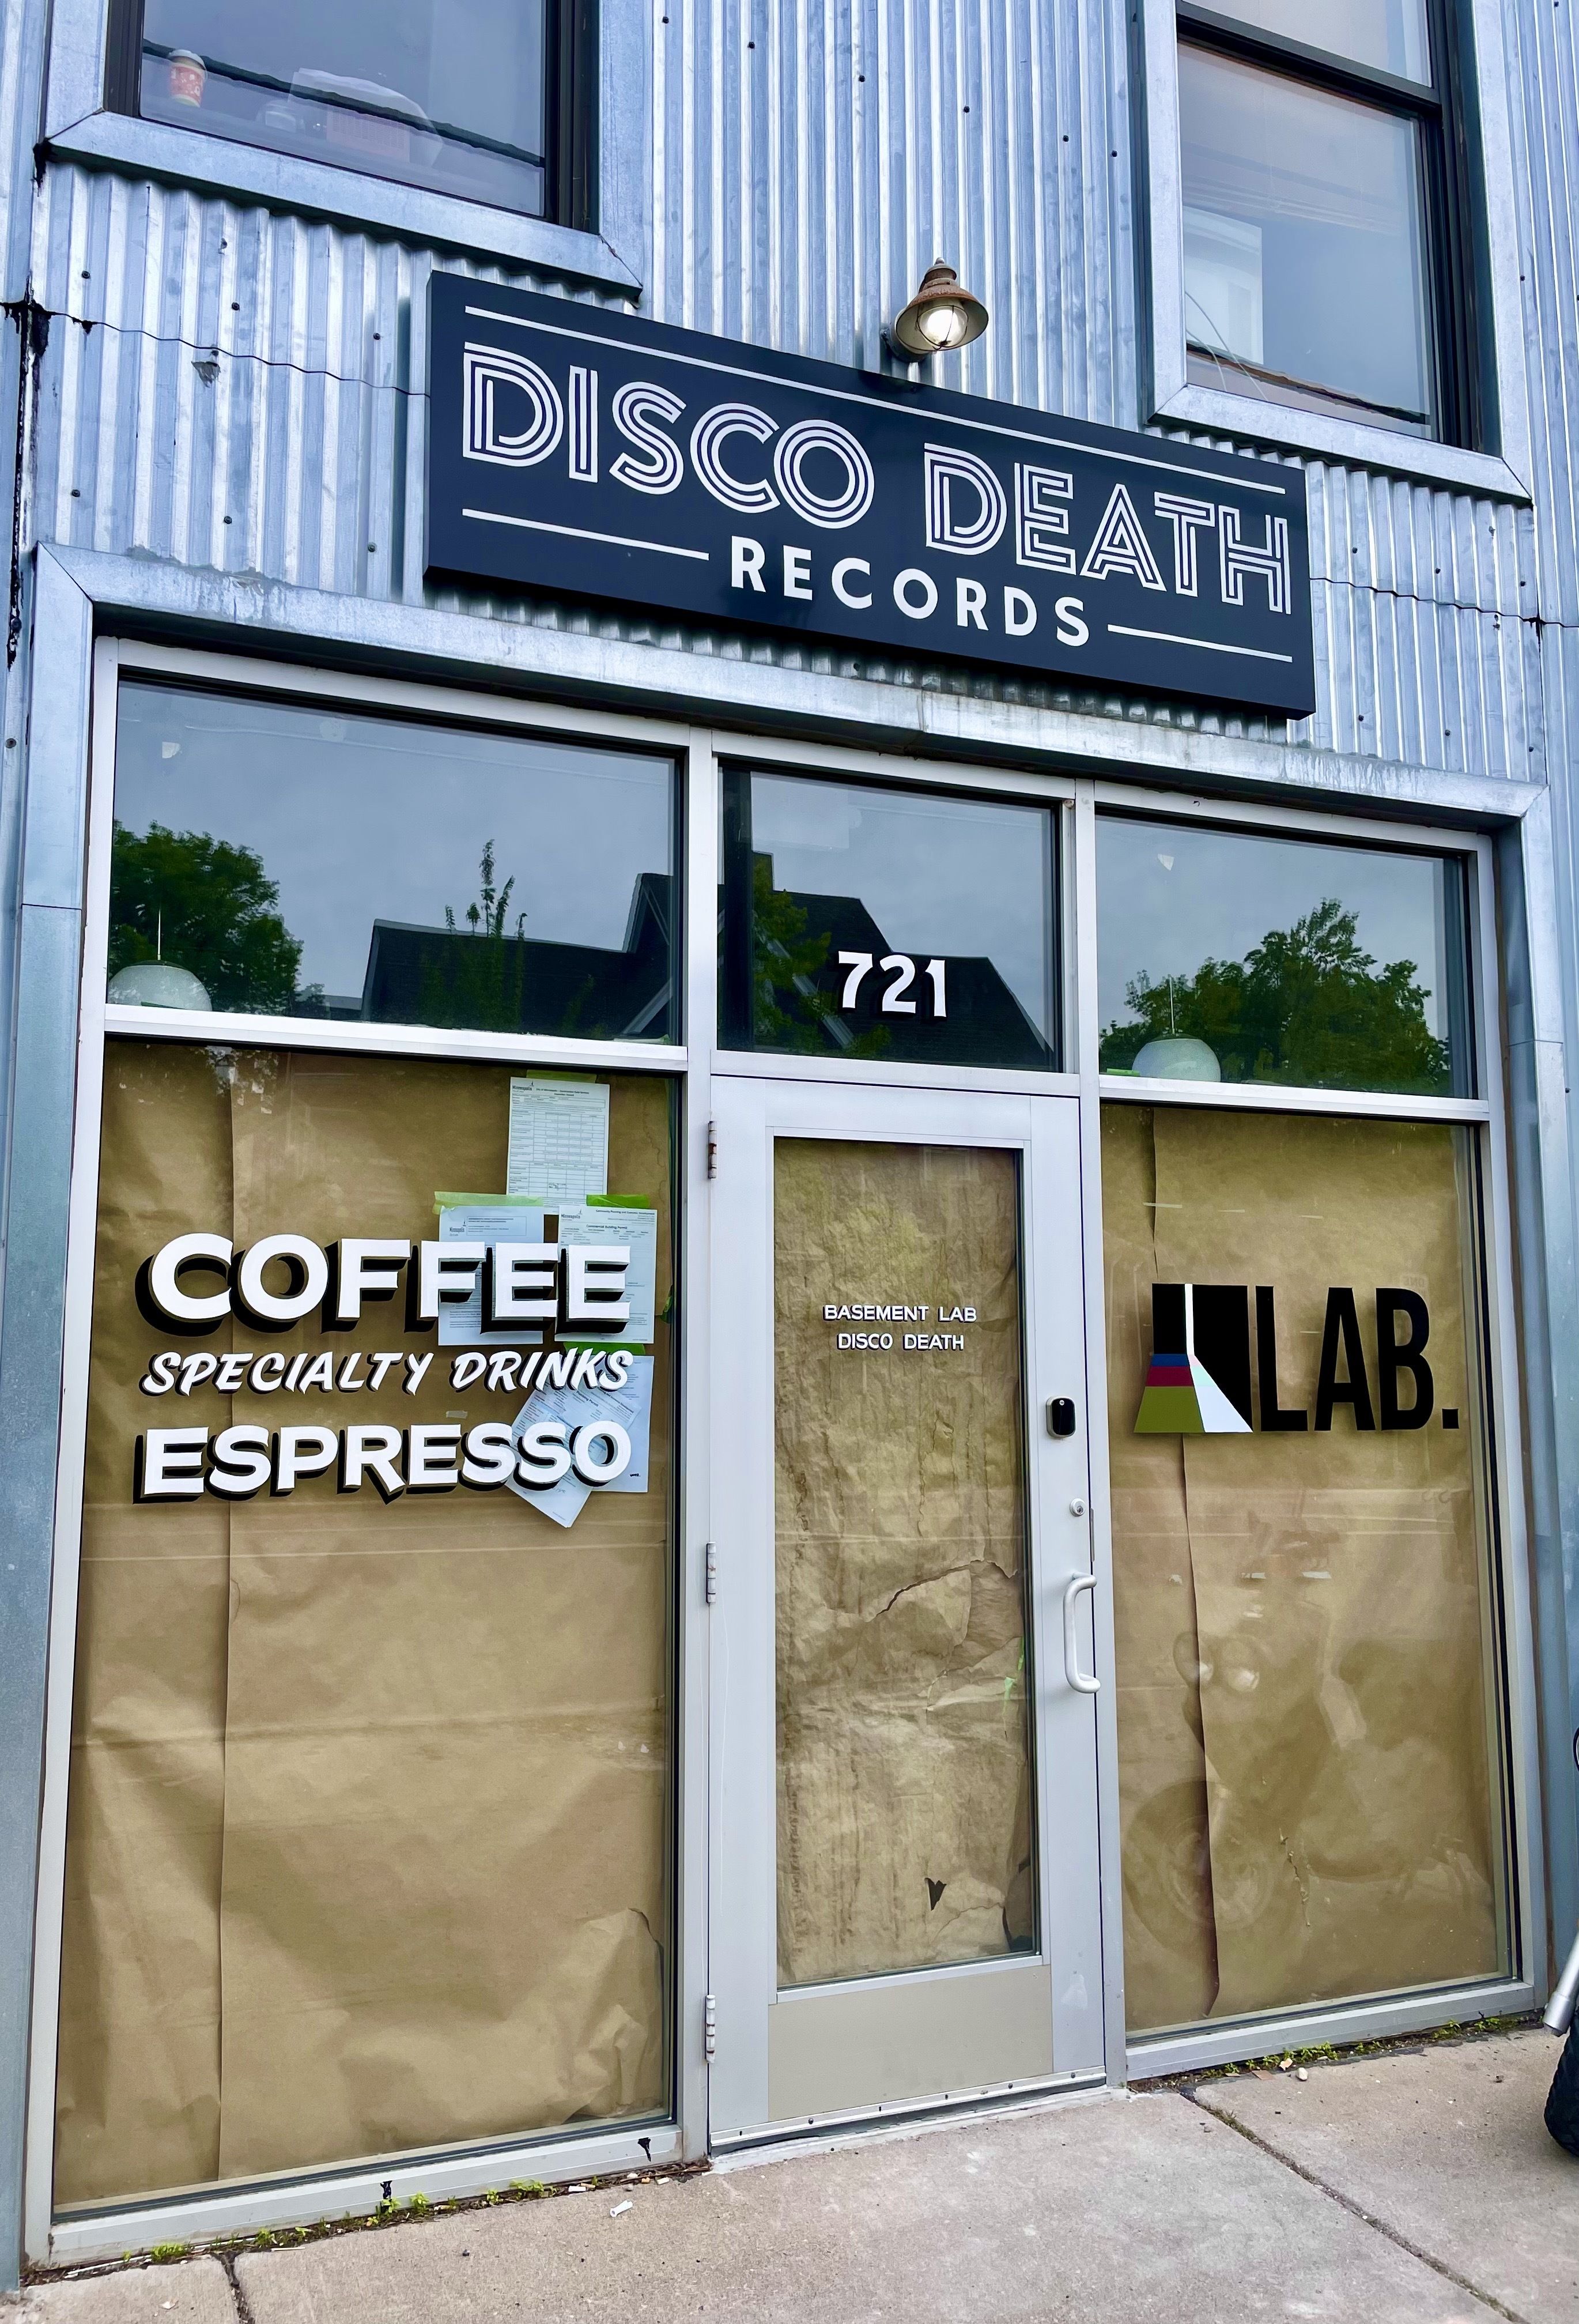 The exterior of a gray building with a sign reading Disco Death Records.